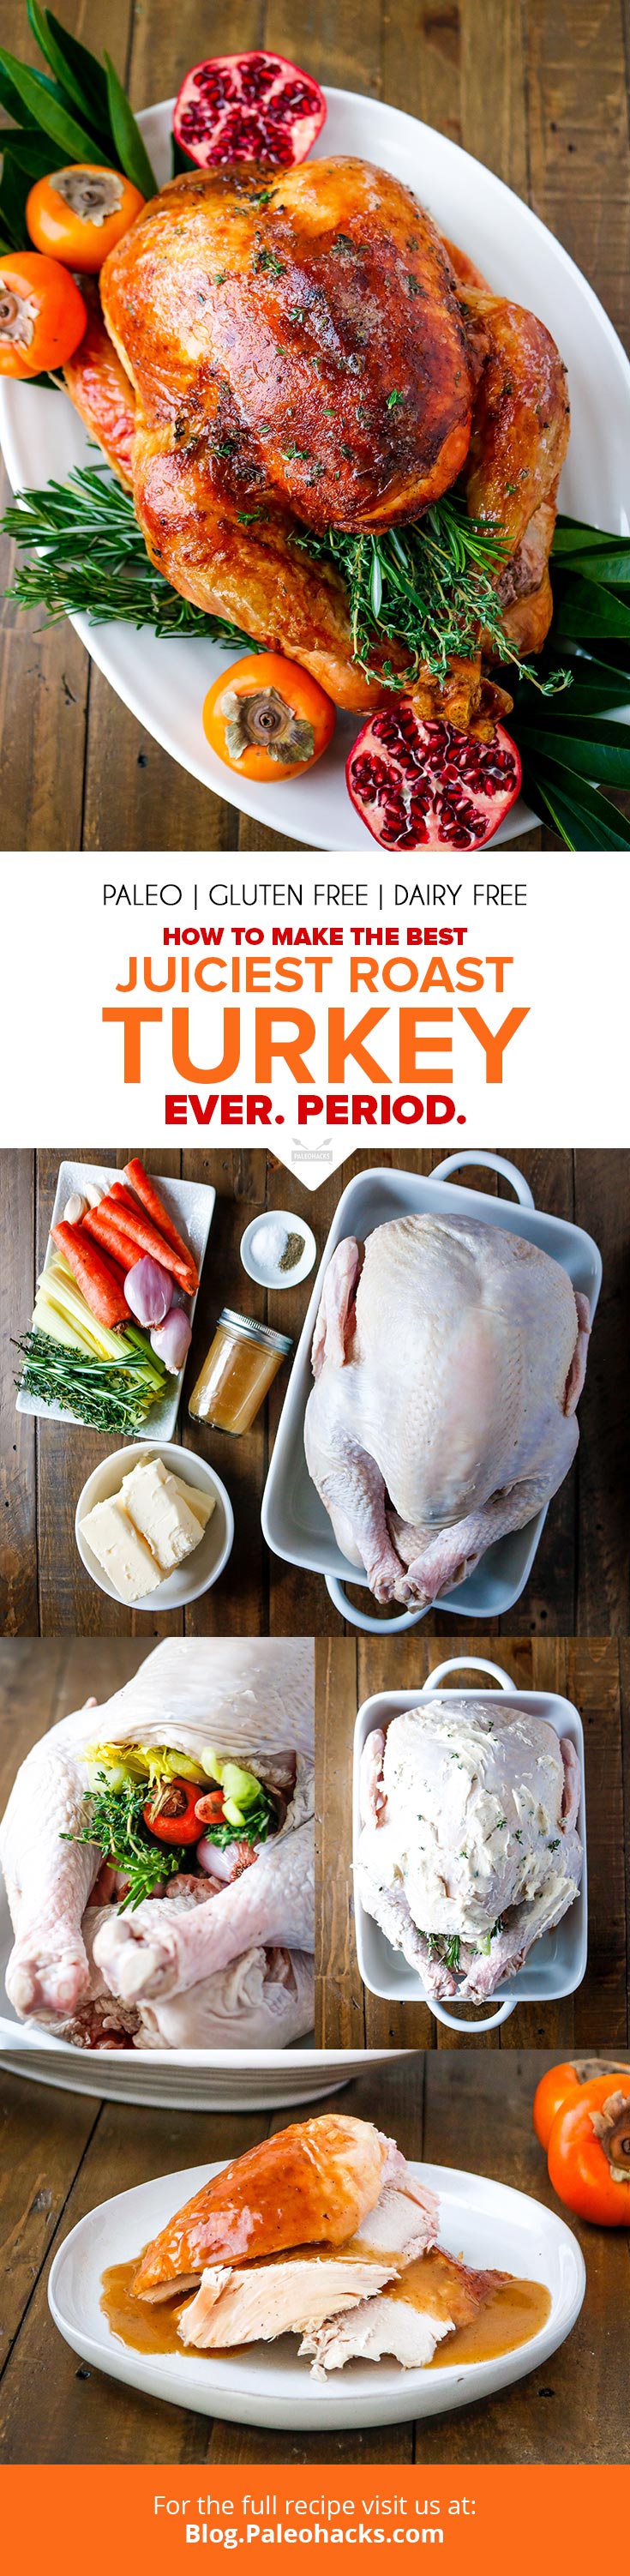 Skip the holiday hassle and create a foolproof juicy turkey with herbed butter, seasoned veggies, and perfectly caramelized skin.